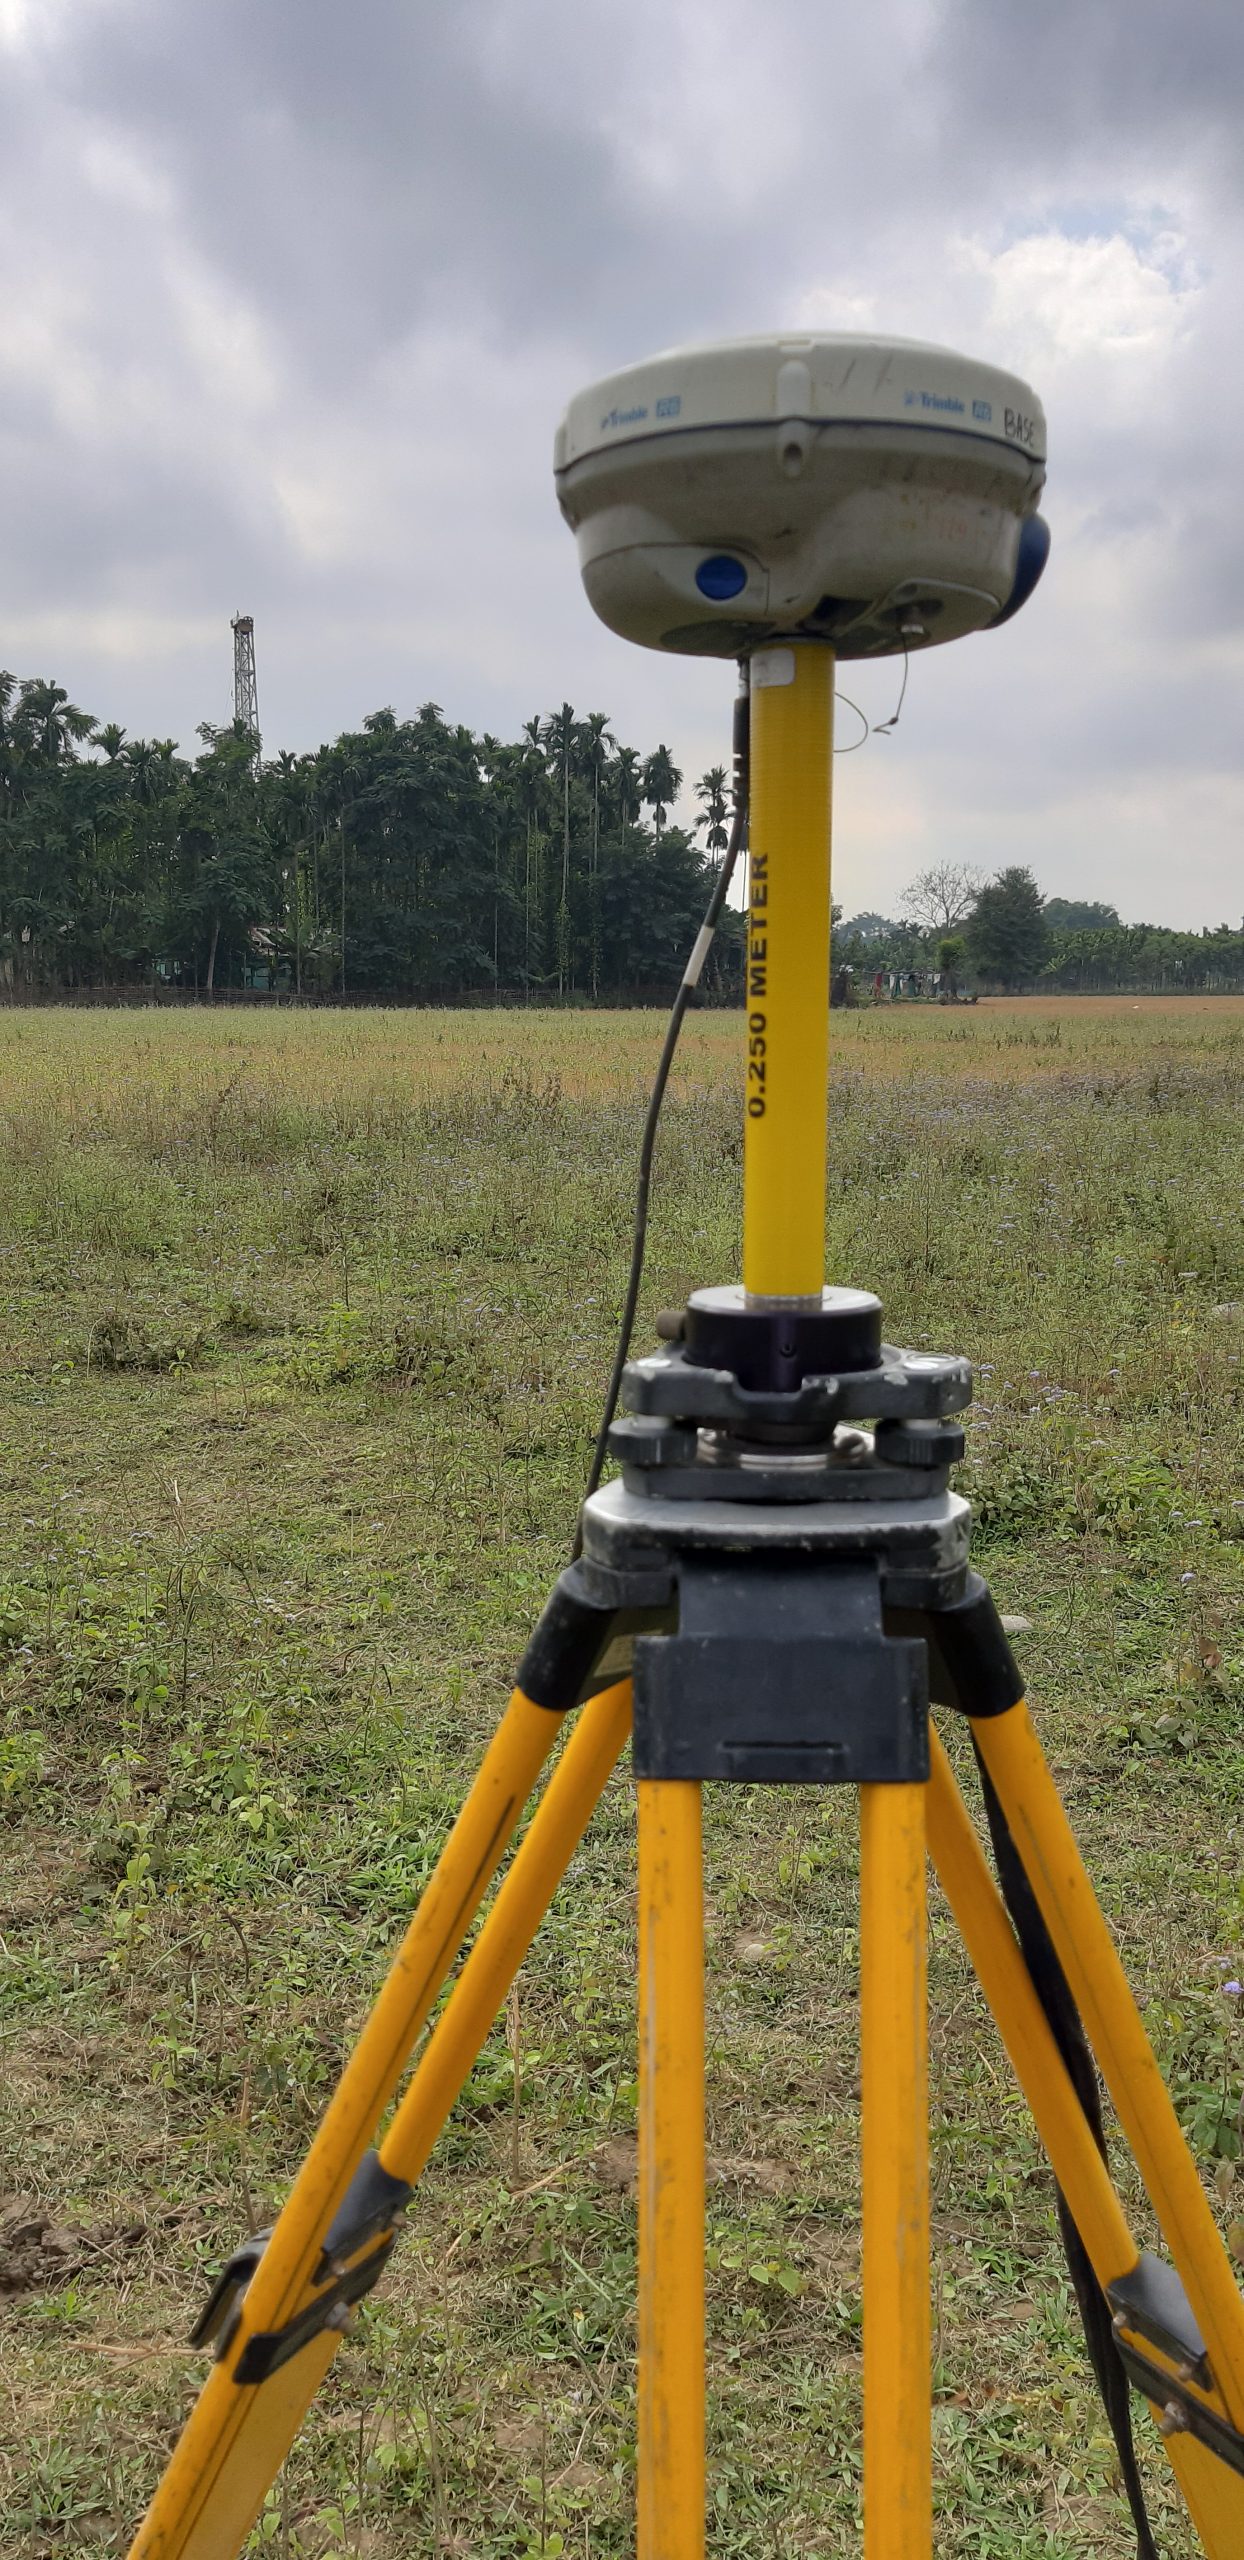 Trimble all-in-one surveying solution for sector